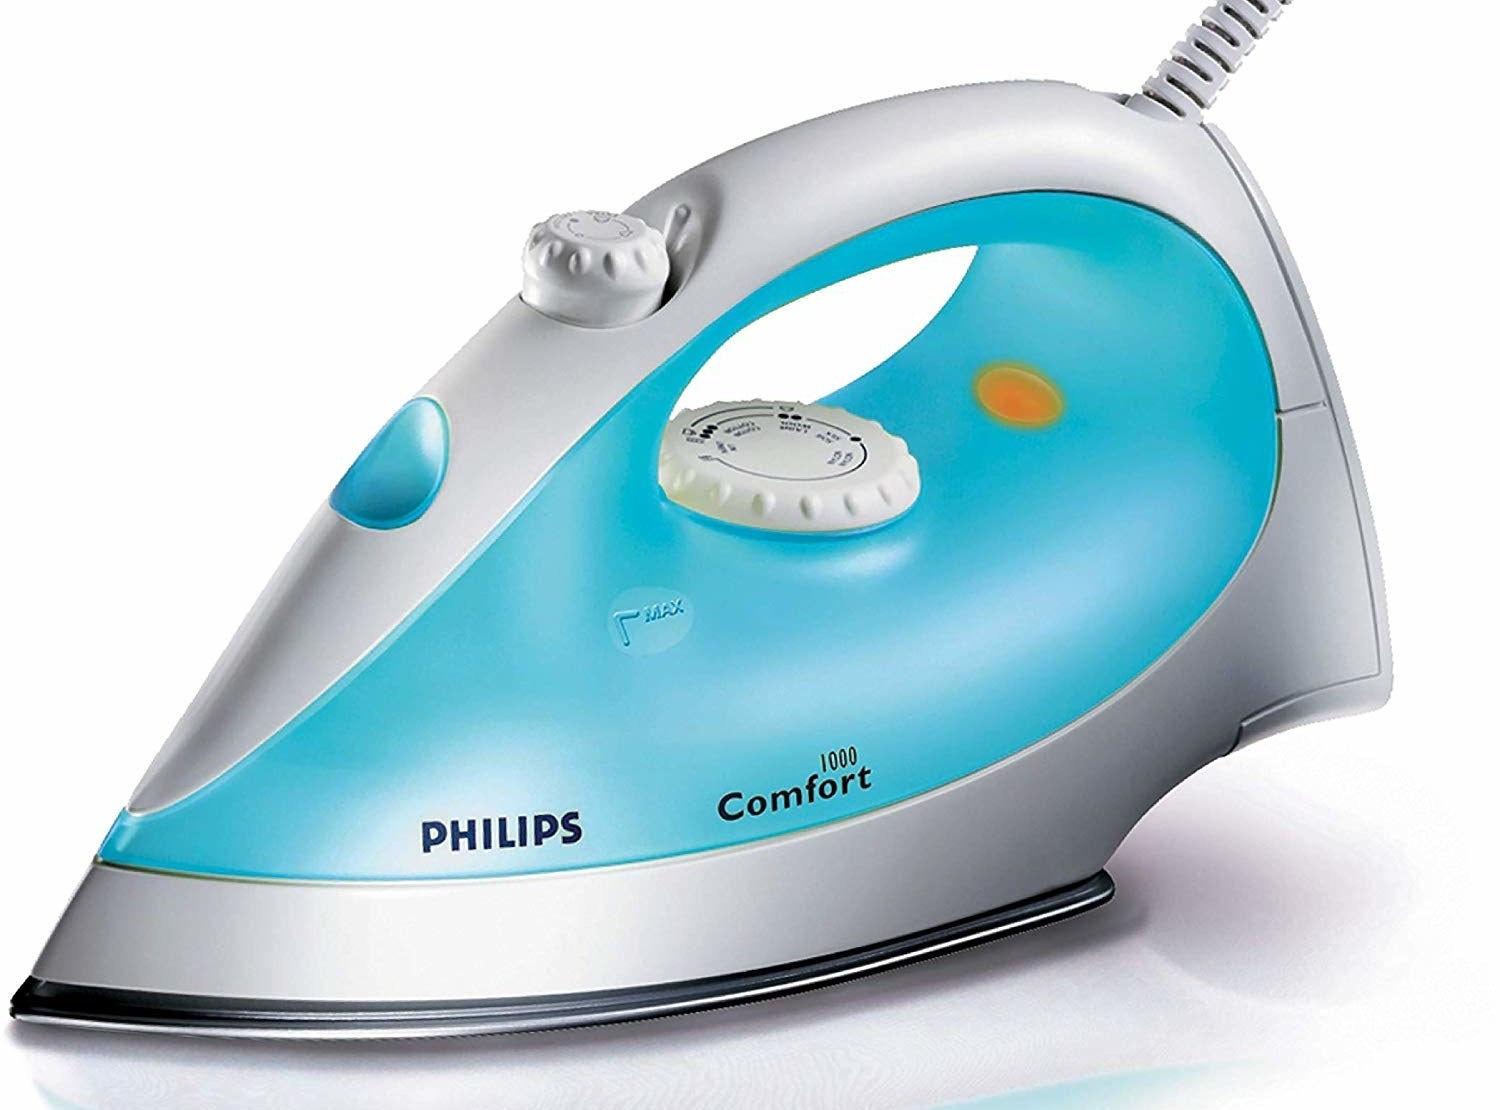 A Philips steam iron in white and blue.